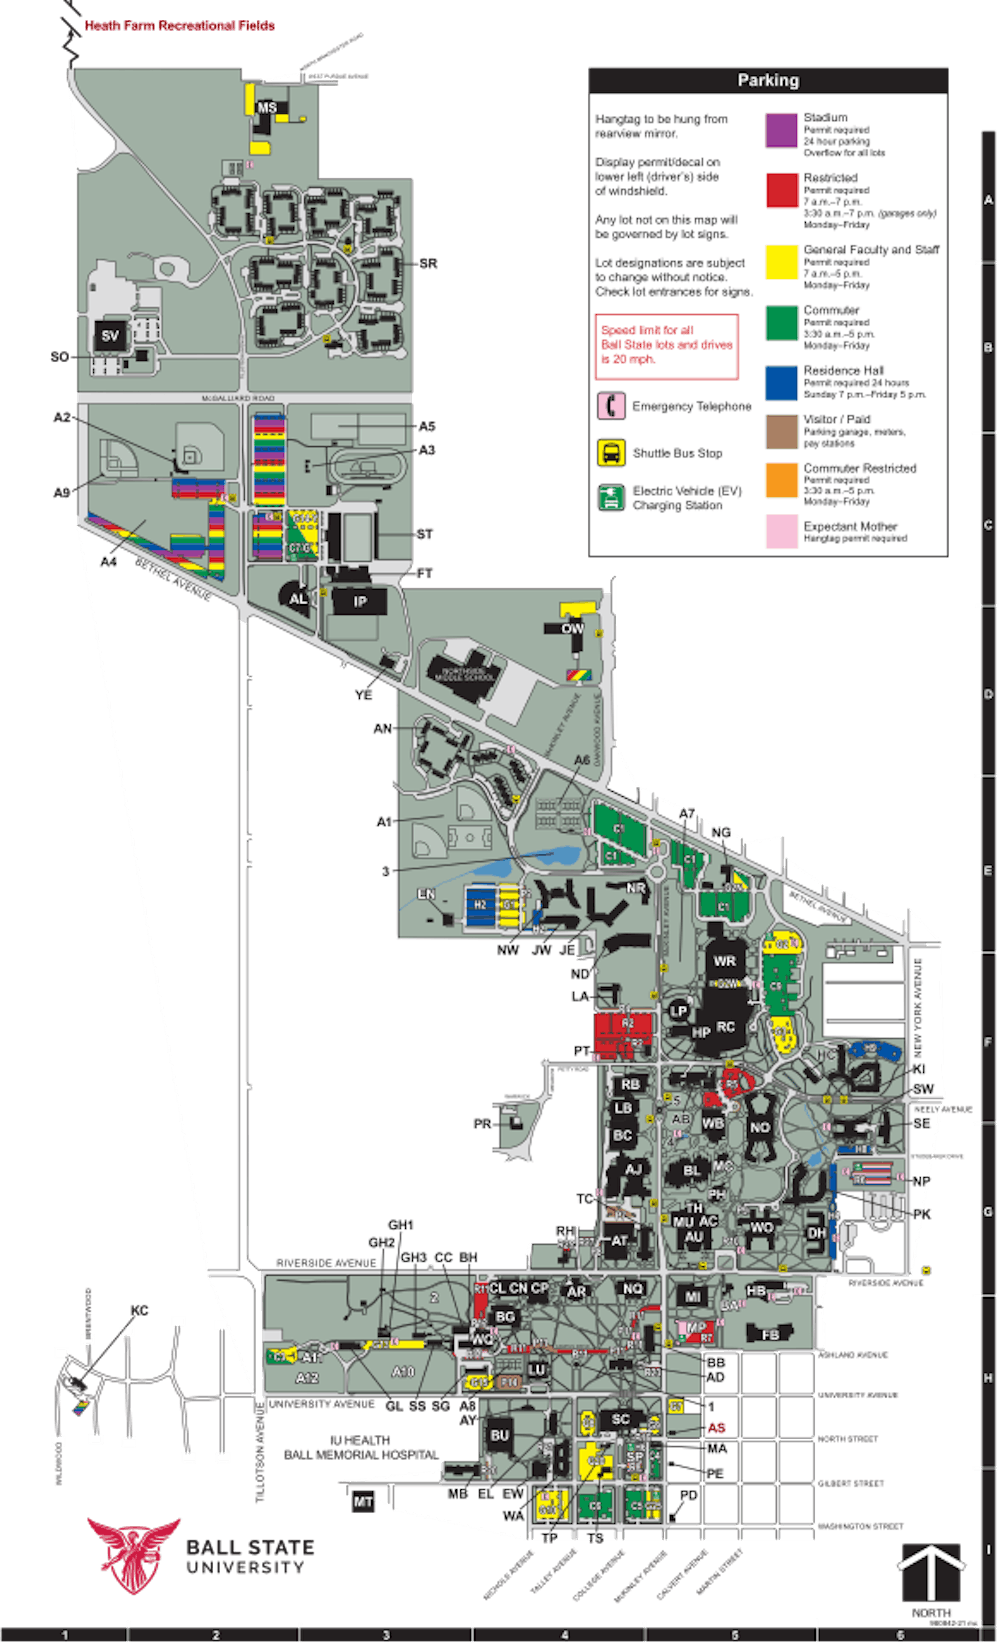 Parking and Transportation for Off-Campus Students